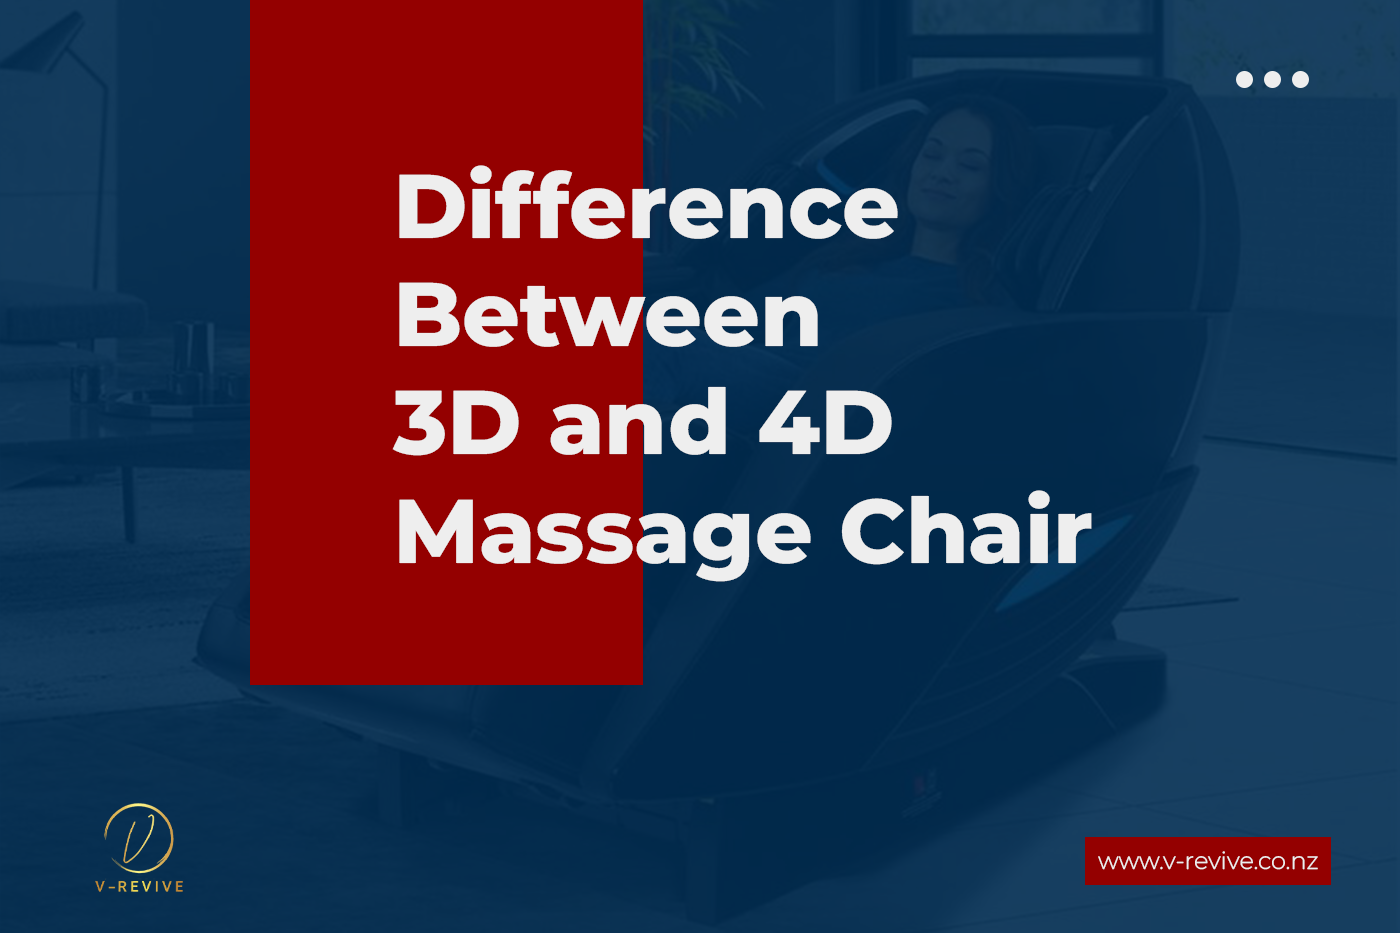 Difference Between 3D and 4D Massage Chairs